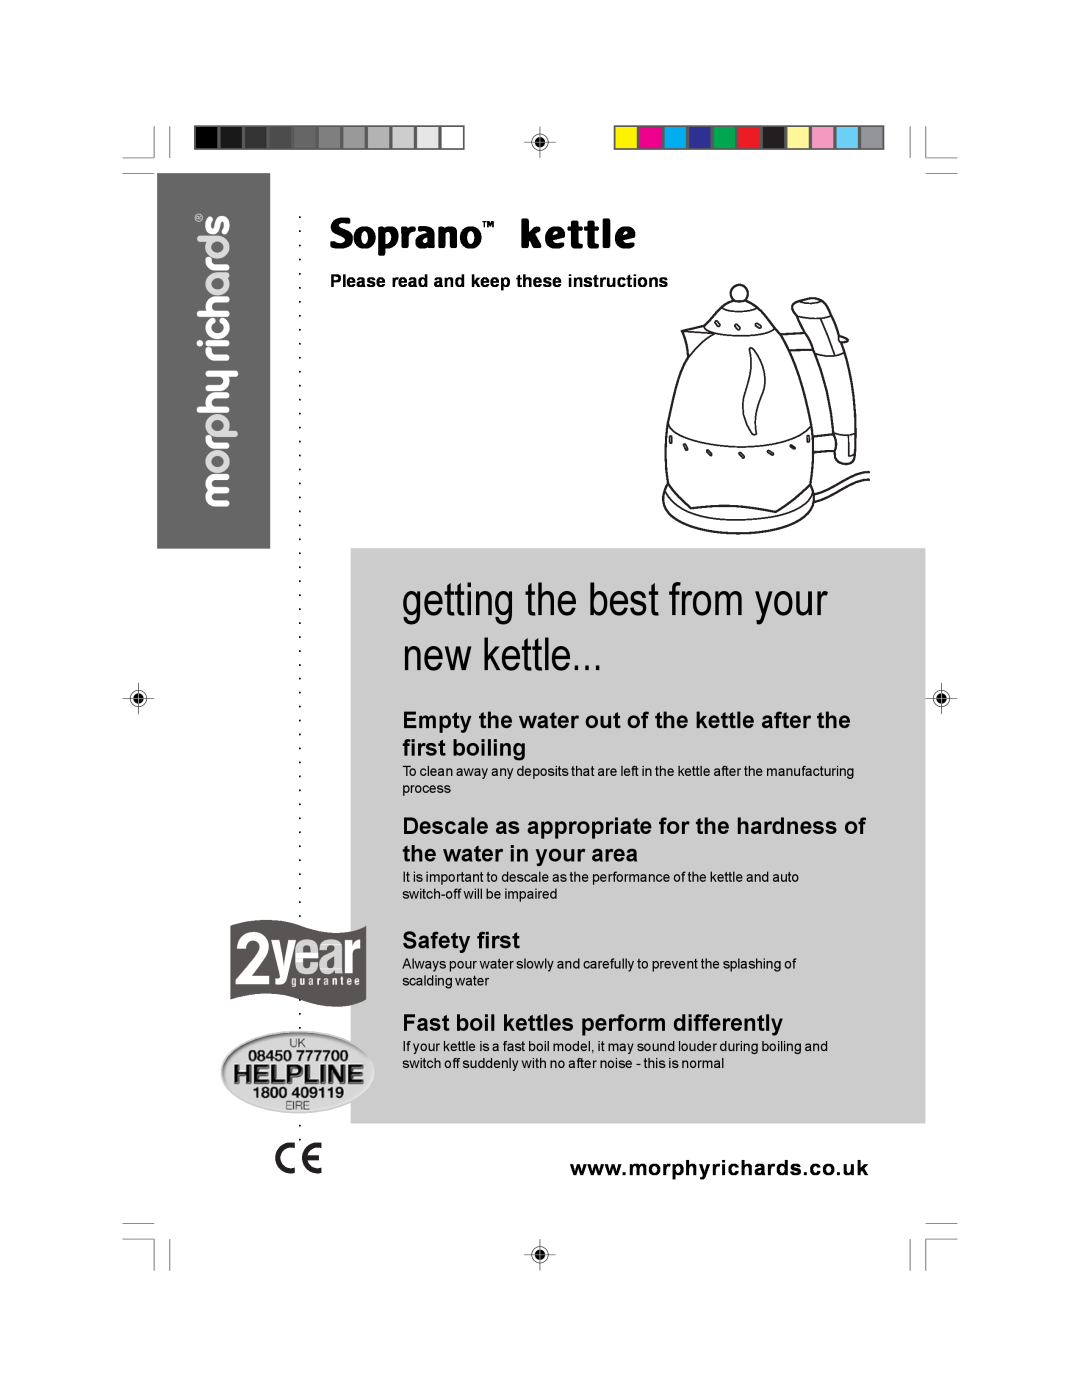 Morphy Richards Soprano kettle manual getting the best from your new kettle, SopranoTM kettle, Safety first 